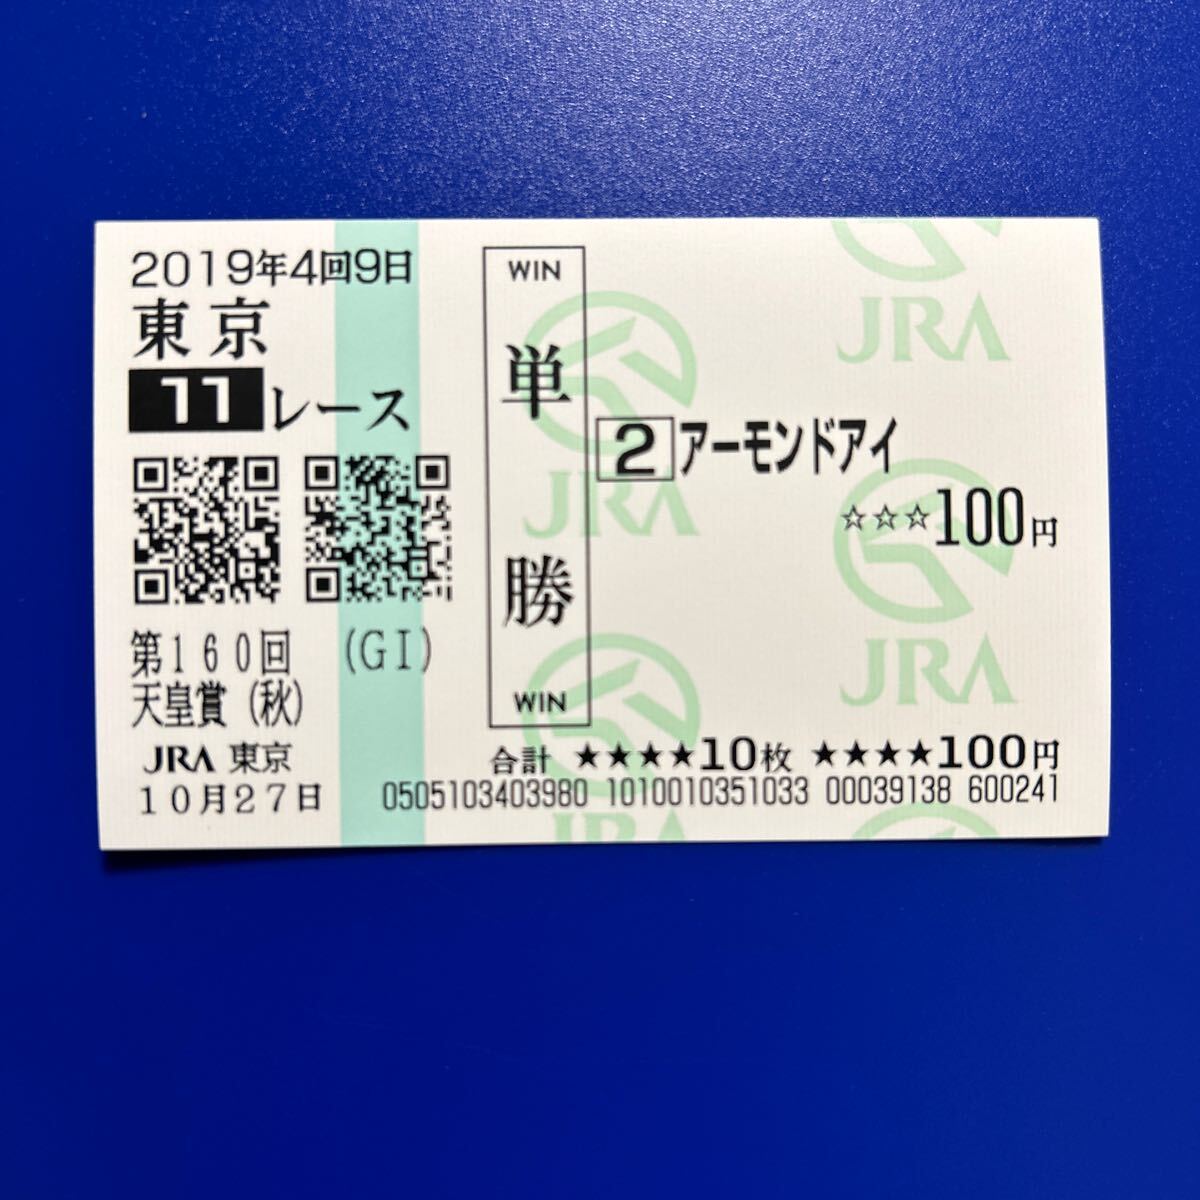 2019 year heaven ..( autumn ) almond I actual place single . horse ticket amount 9